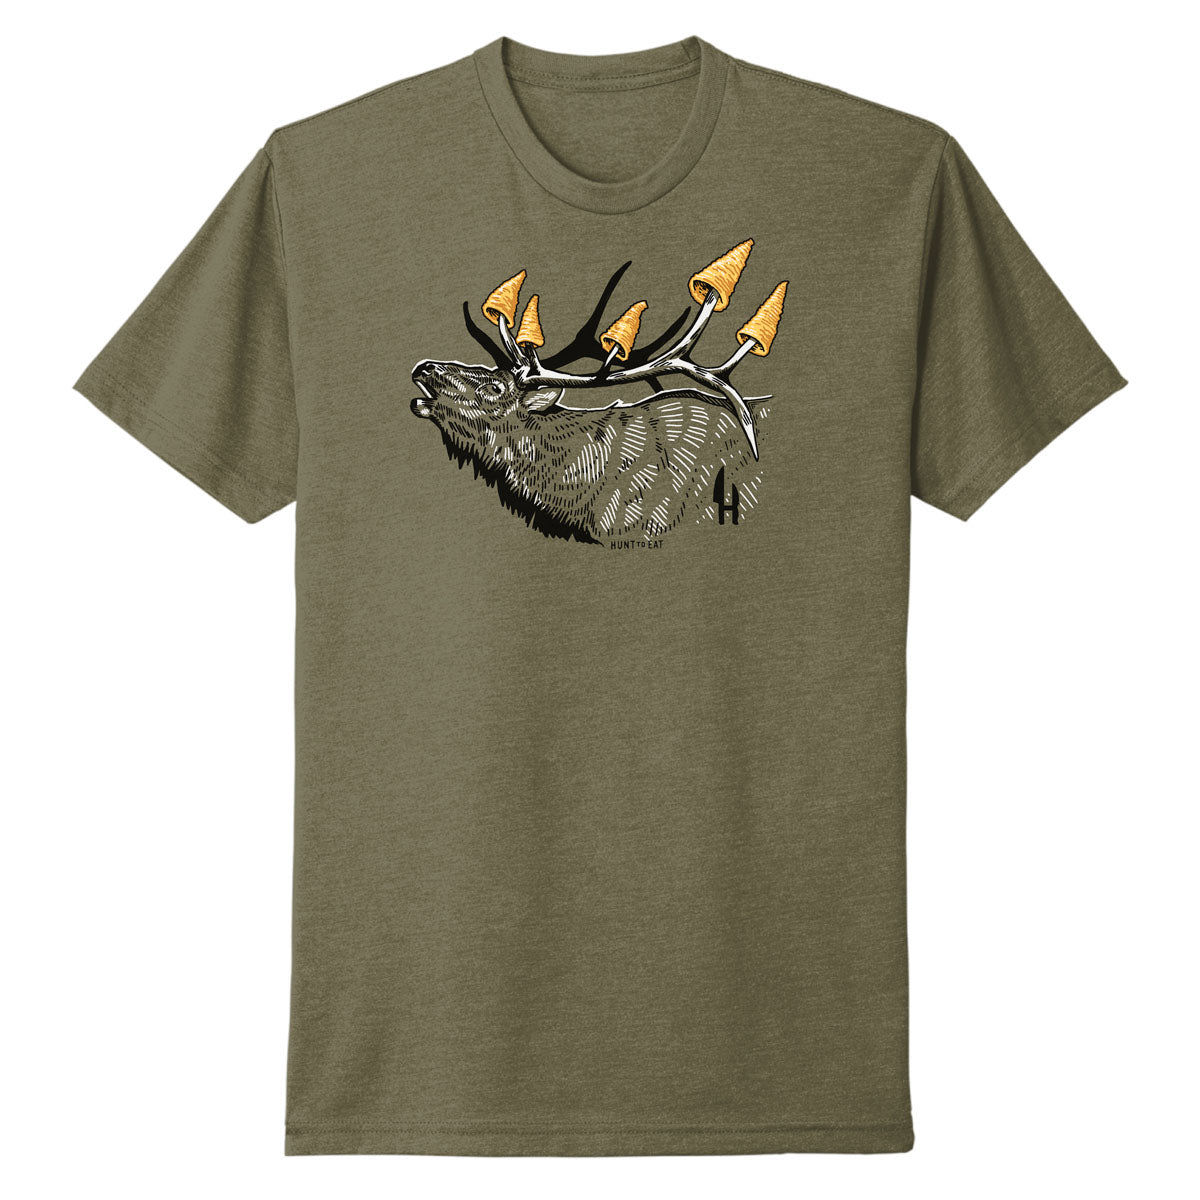 An olive green T shirt with an illustrated design of a bugling elk. The elks antlers are tipped with the snack food bugles to make a visual pun.